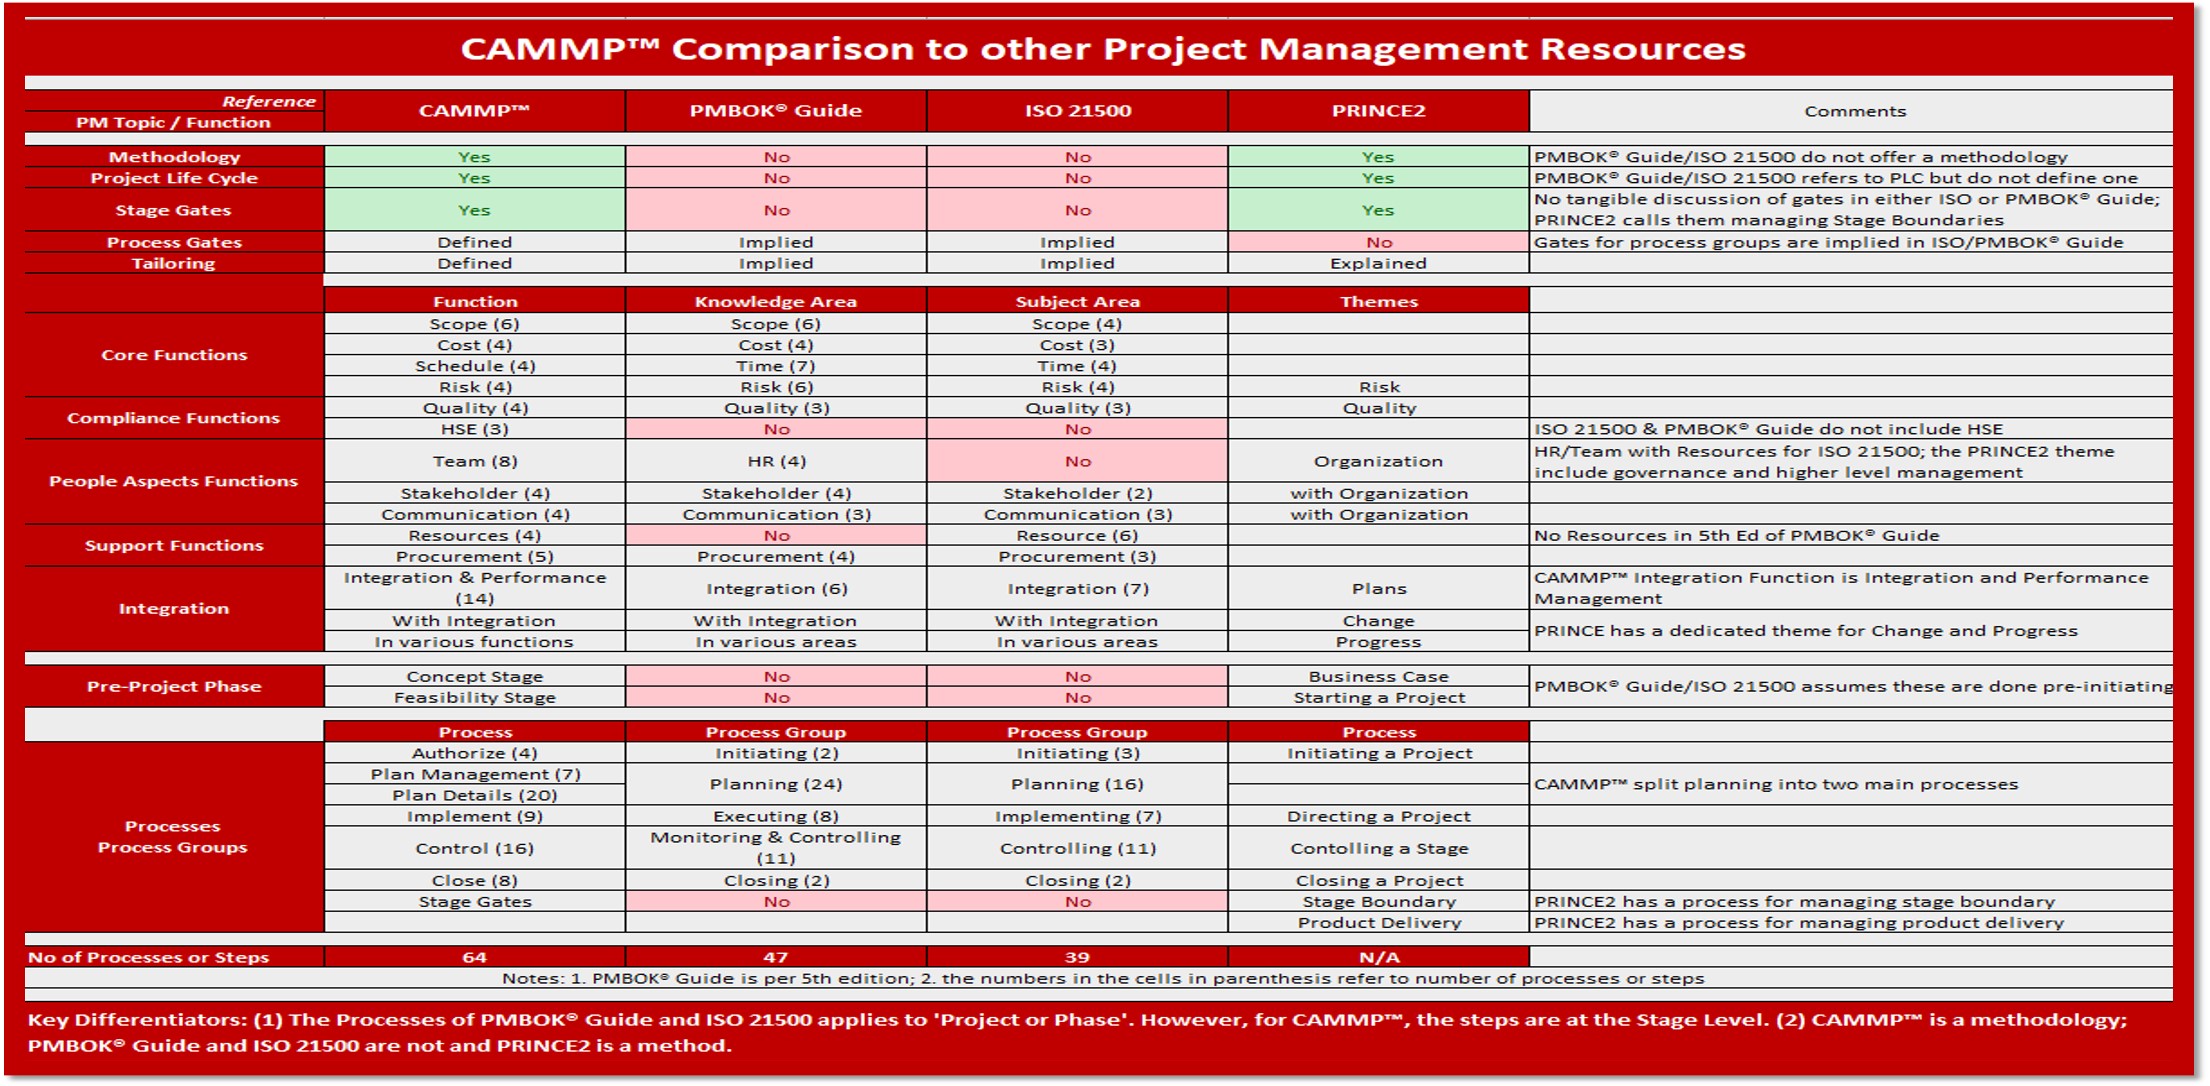 CAMMP Comparison to PMBOK Guide, ISO 21500, and PRINCE2